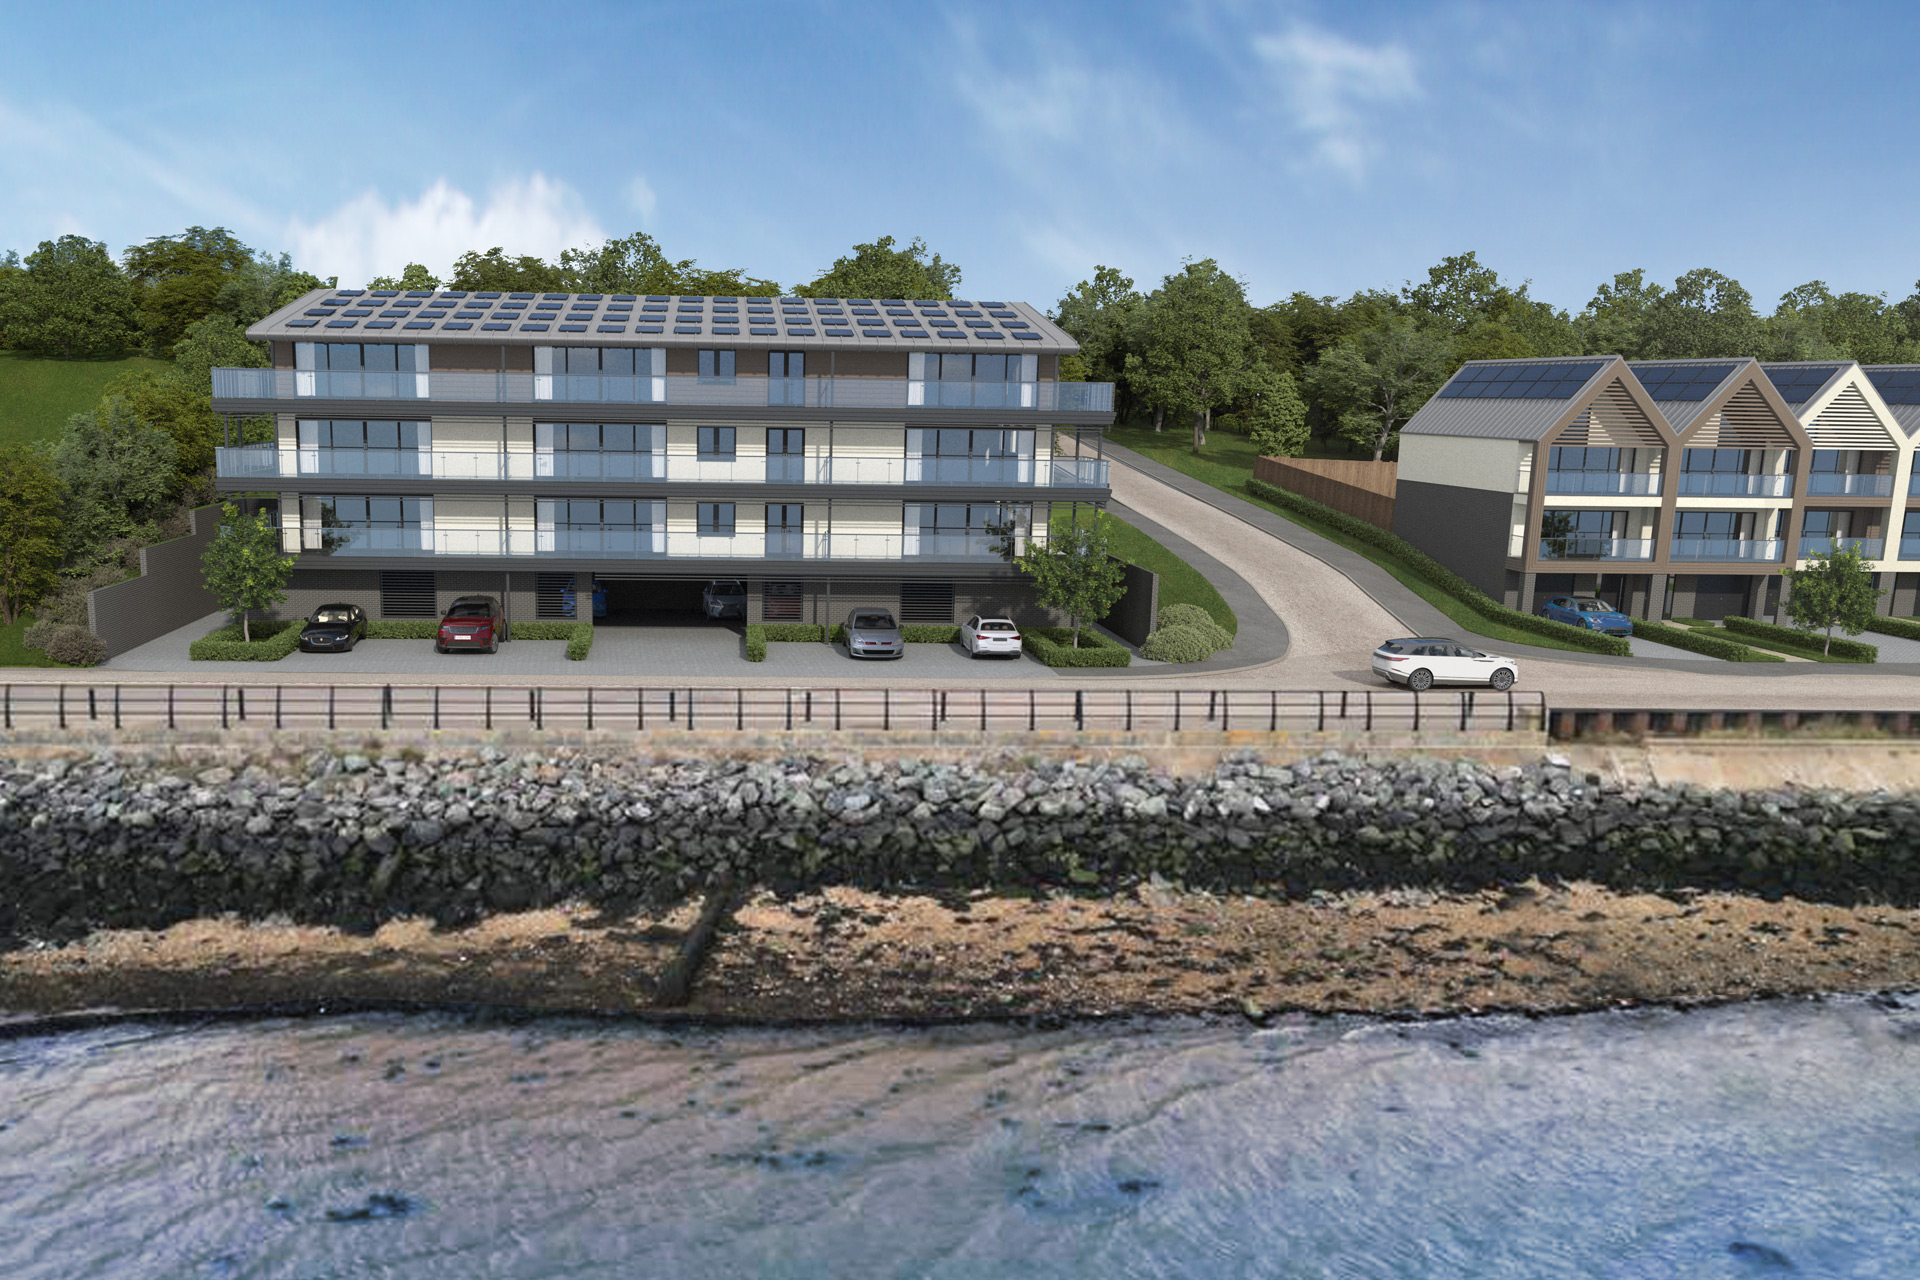 CGI image of waterfront residential development